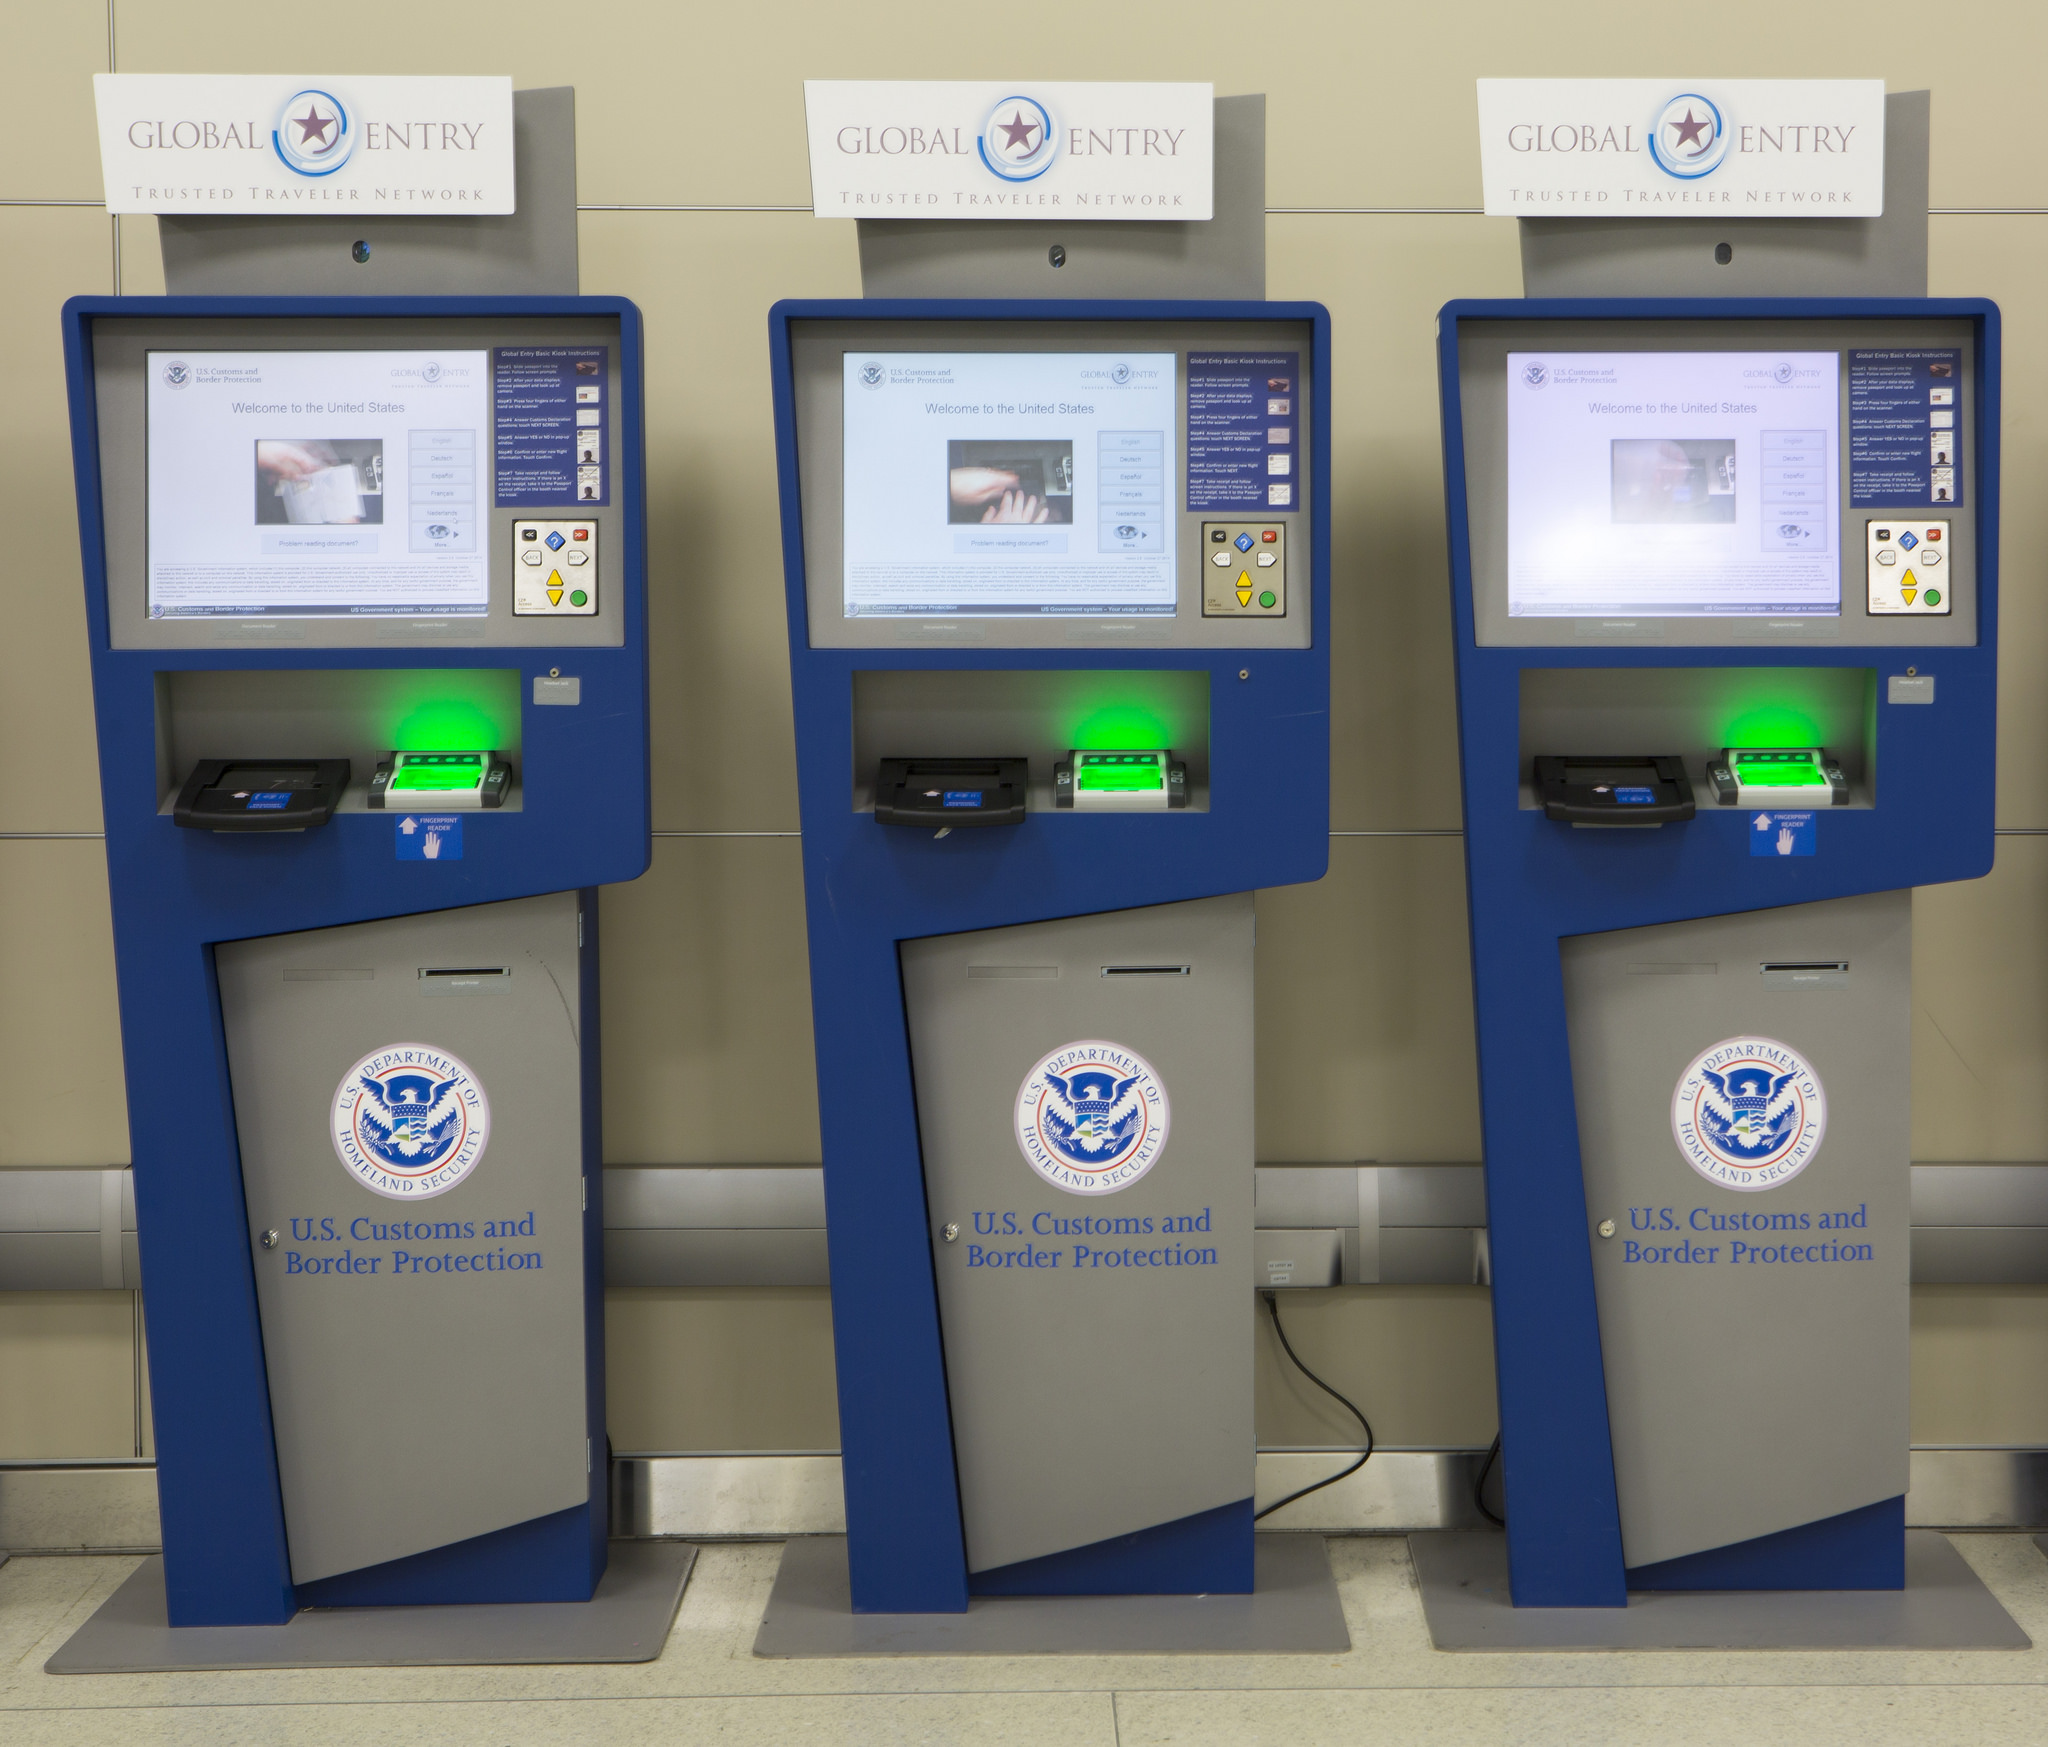 Global Entry and APC Kiosks, located at international airports across the nation, streamline the passenger's entry into the United States. Photo by James Tourtellotte